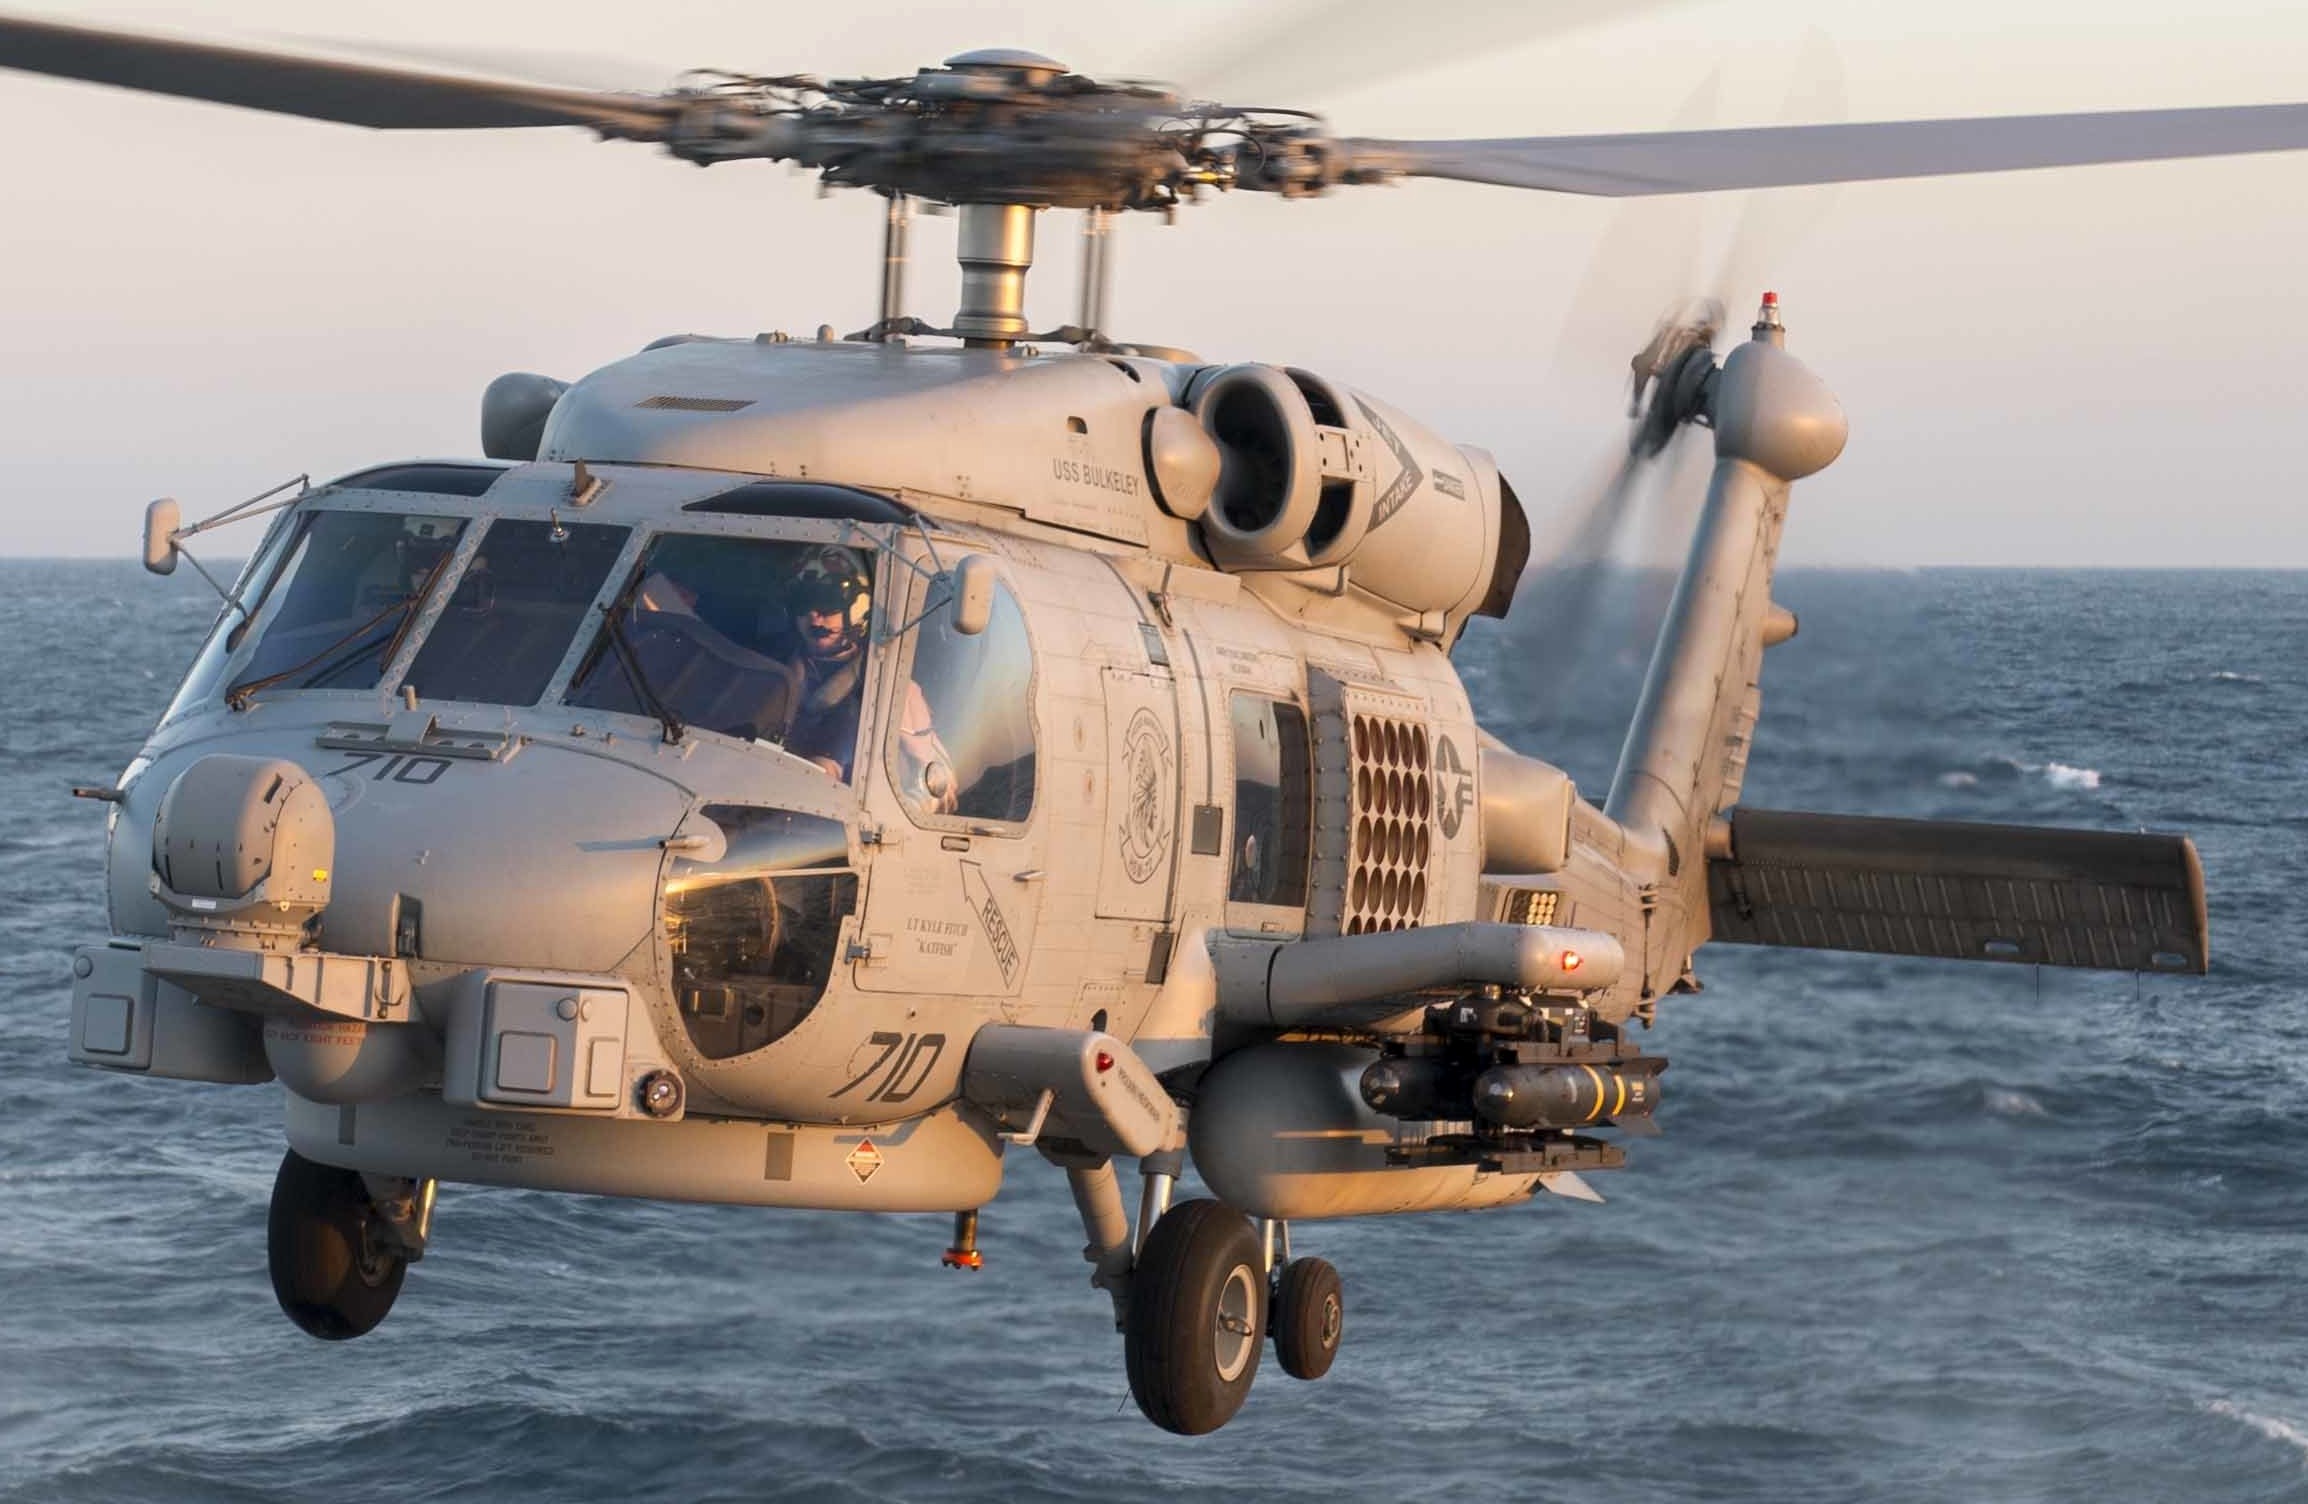 hsm-72 proud warriors helicopter maritime strike squadron us navy mh-60r seahawk 2016 20